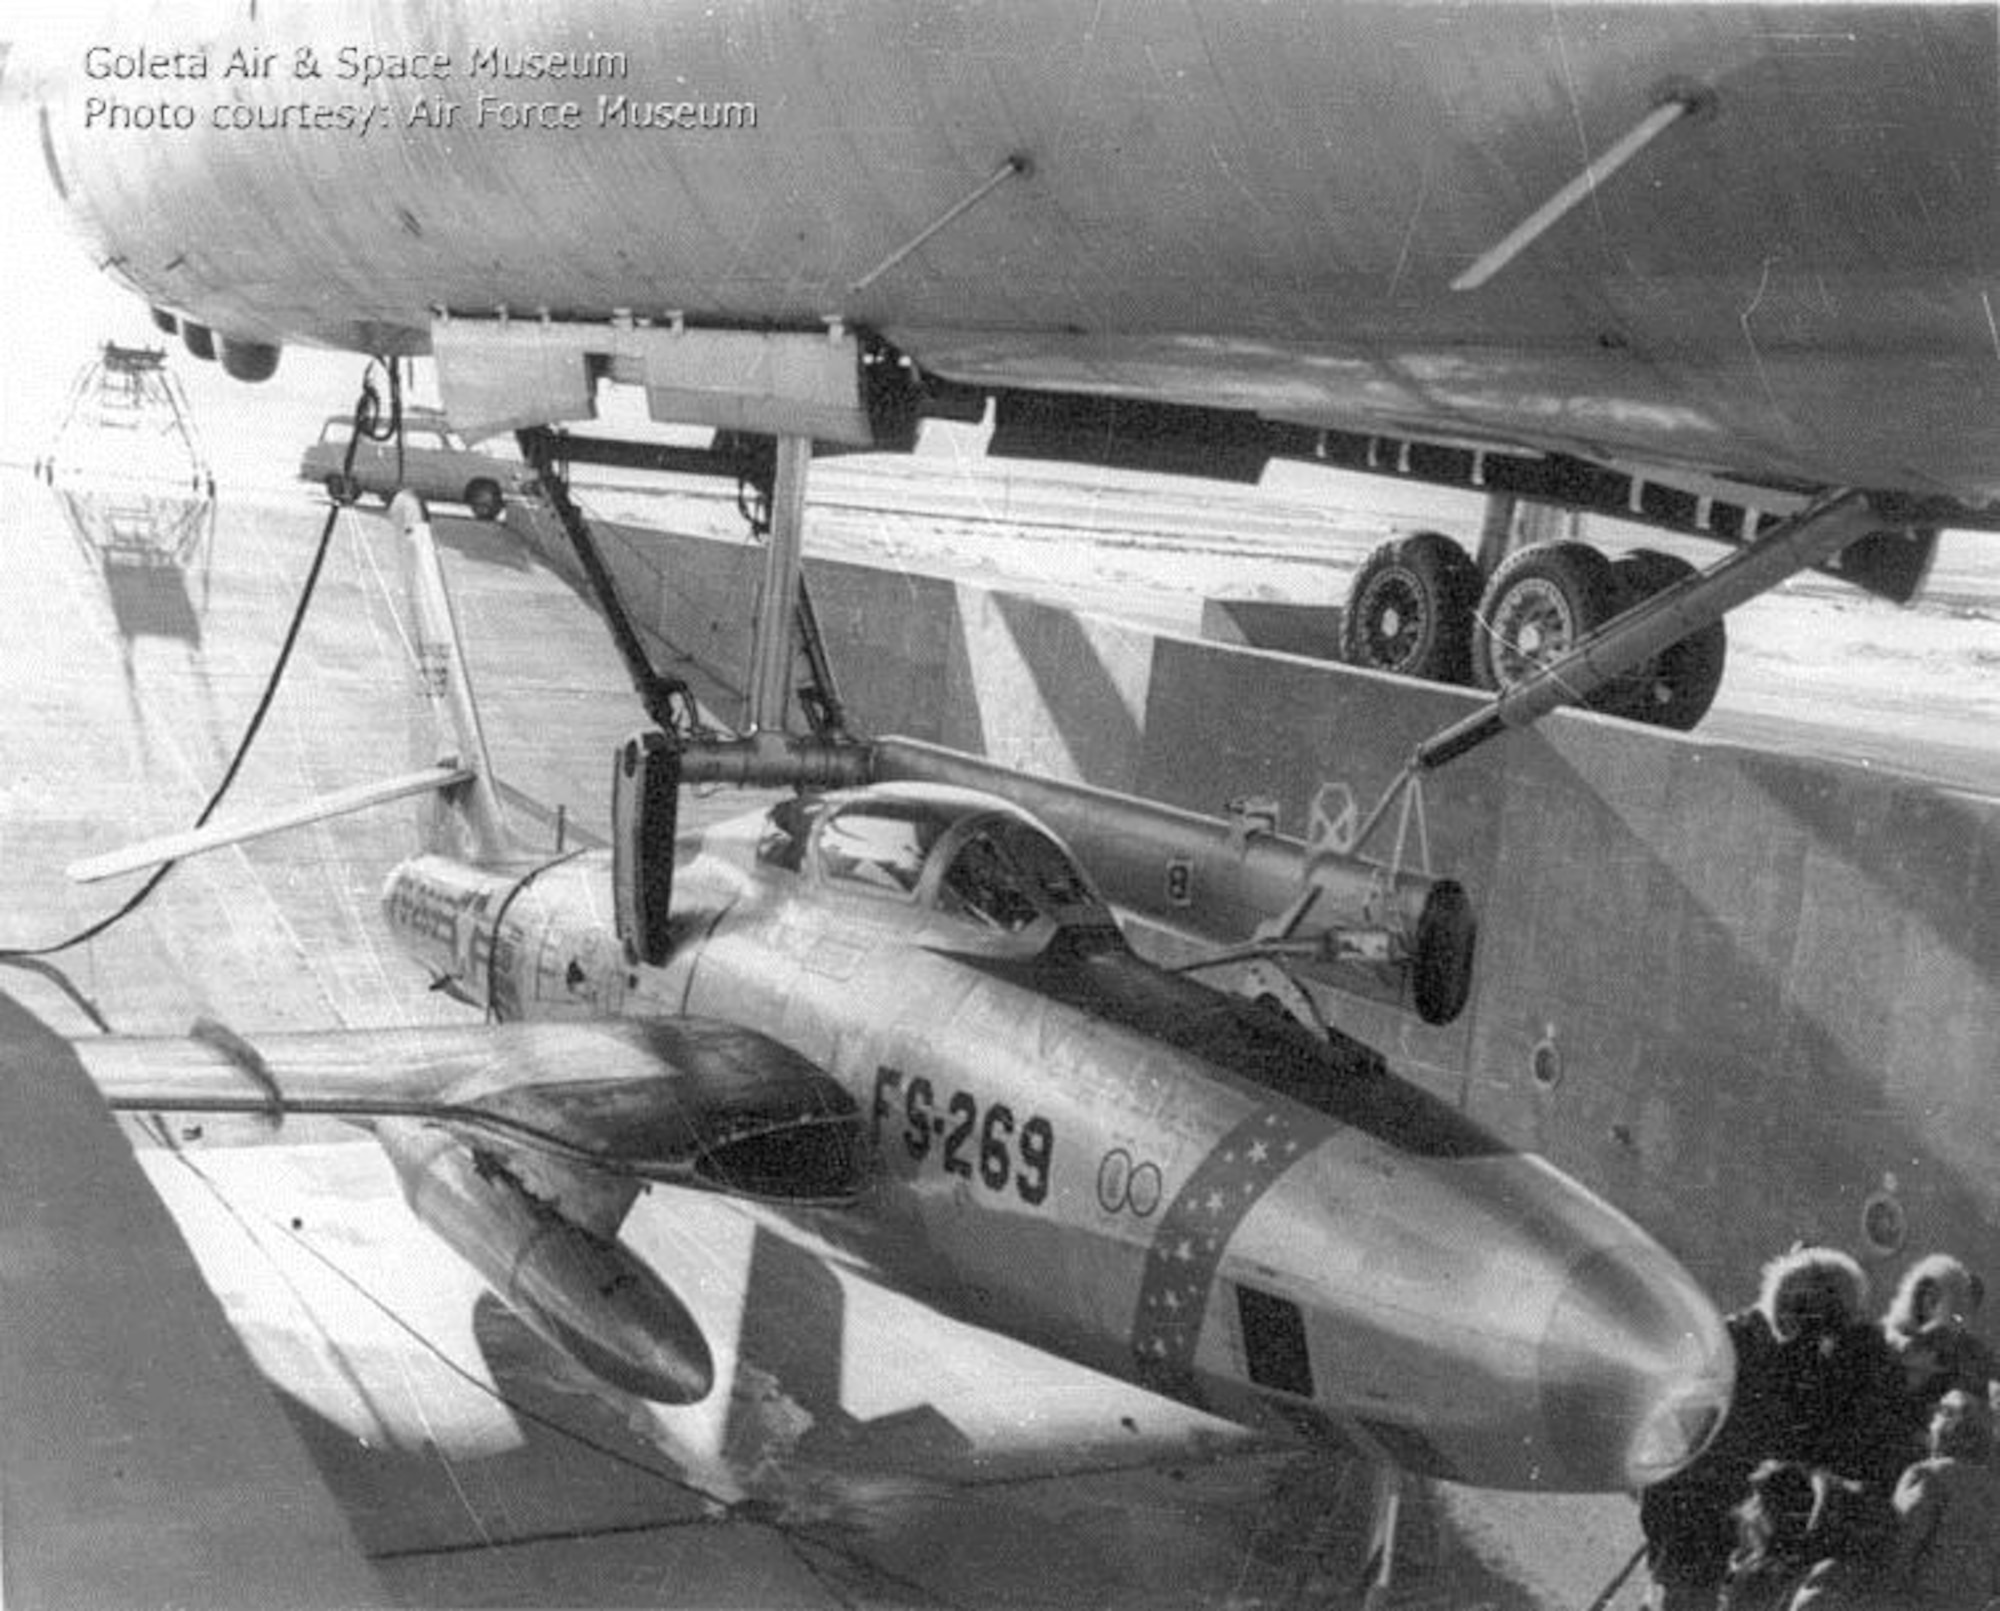 FICON RBF-84K Thunderflash, 52-7269, is lowered from the bomb bay of GRB-36D Peacemaker, 49-2696, at Fairchild Air Force Base, Wash., following an emergency night retrieval on Dec. 12, 1955. The parasite pilot suffered a partial hydraulic system failure but succeeded in hooking onto the trapeze. Post-flight inspection revealed he had turned off his own hydraulic system due to the distractions of approaching the trapeze. (U.S. Air Force photo)